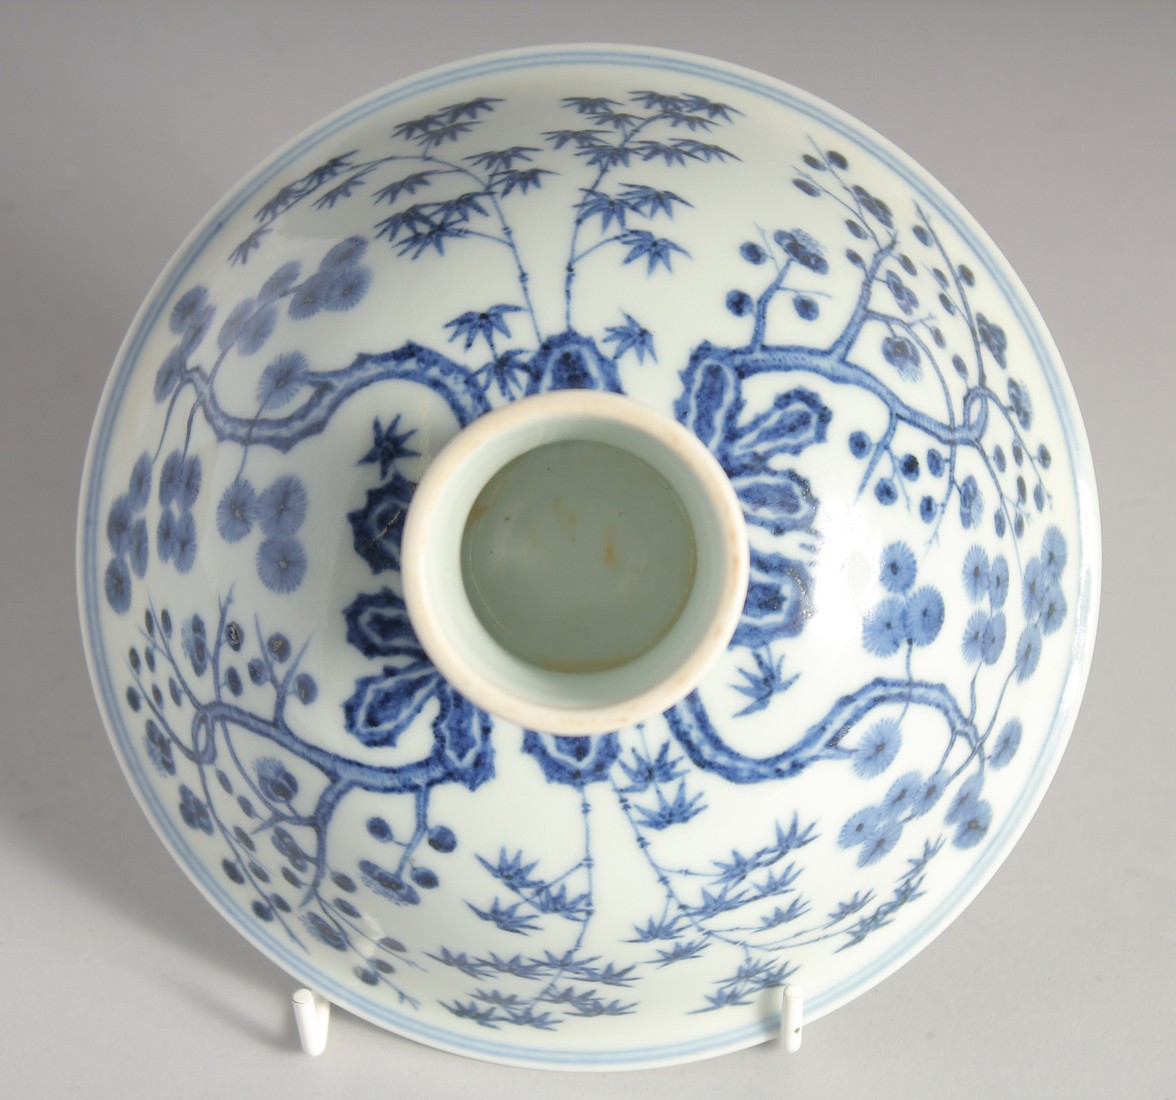 A CHINESE BLUE AND WHITE PORCELAIN PEDESTAL BOWL, the interior with six-character mark, 17cm - Image 4 of 6